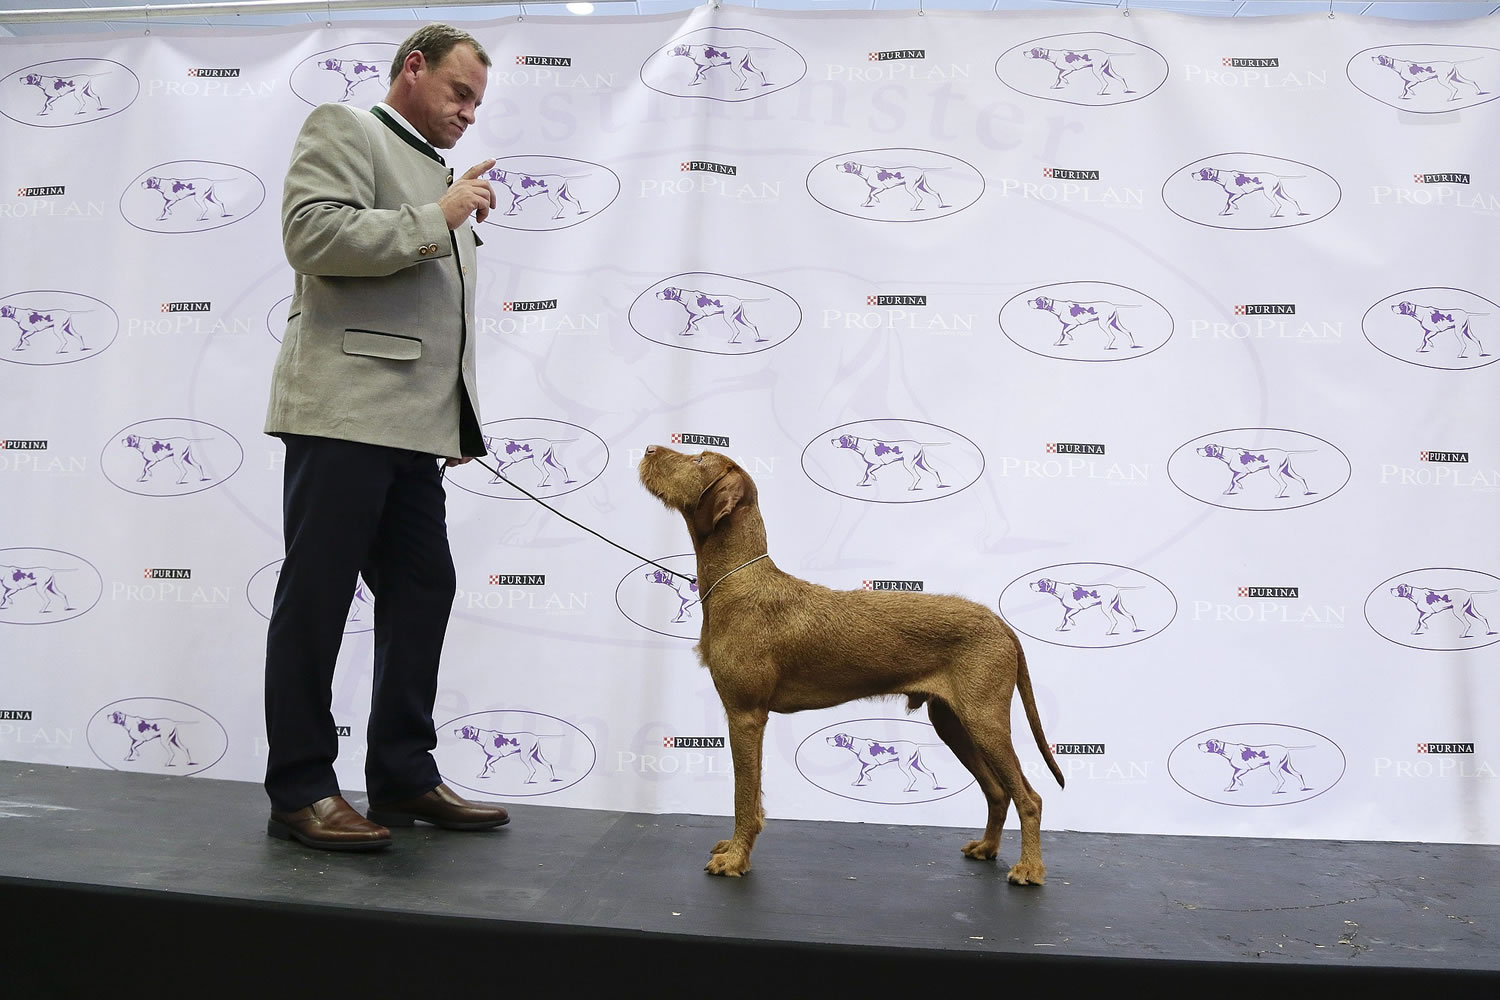 Anton Sagh, of Montreal, Quebec, motions to Falko, a wire-haired vizsla, to pose during a news conference Tuesday.